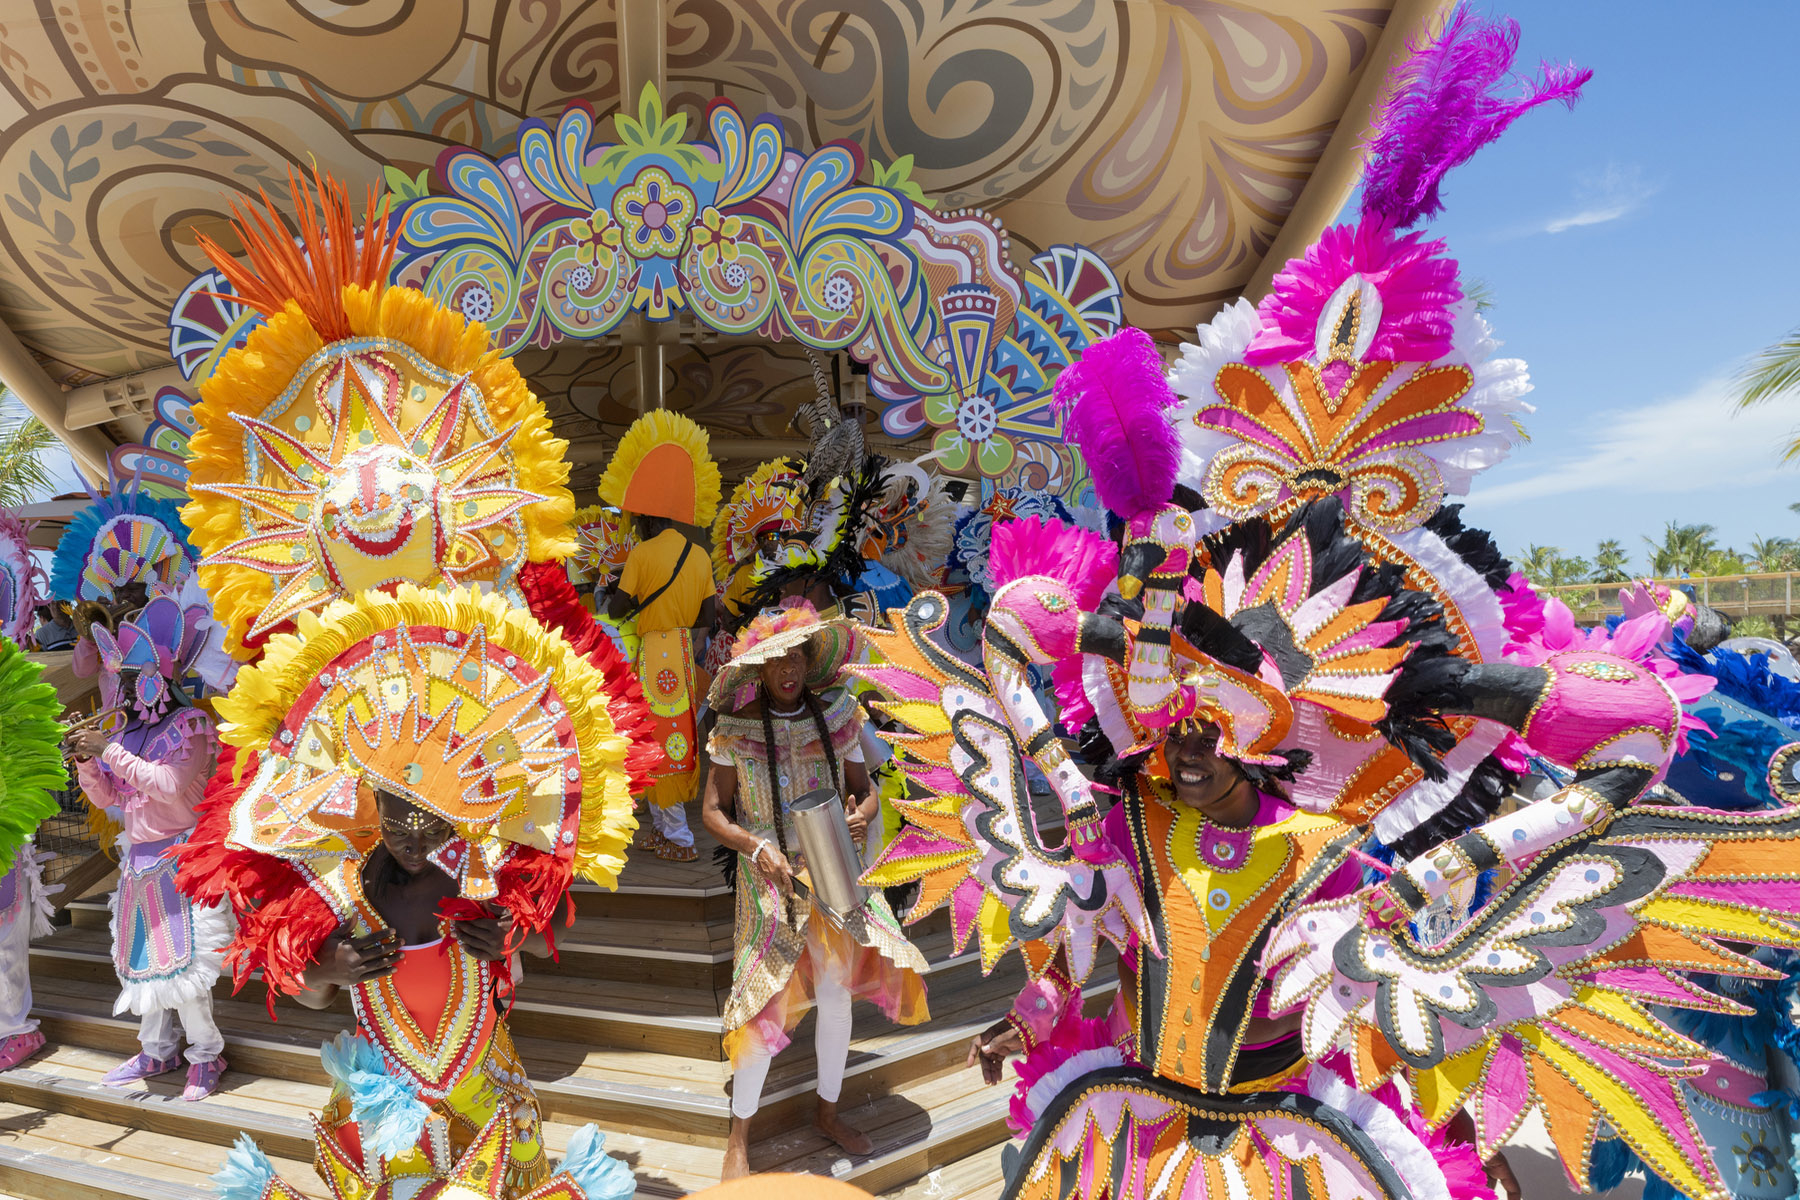 A vibrant carnival scene with people in elaborate, colorful costumes decorated with feathers and intricate patterns, performing on a stage with a festive backdrop